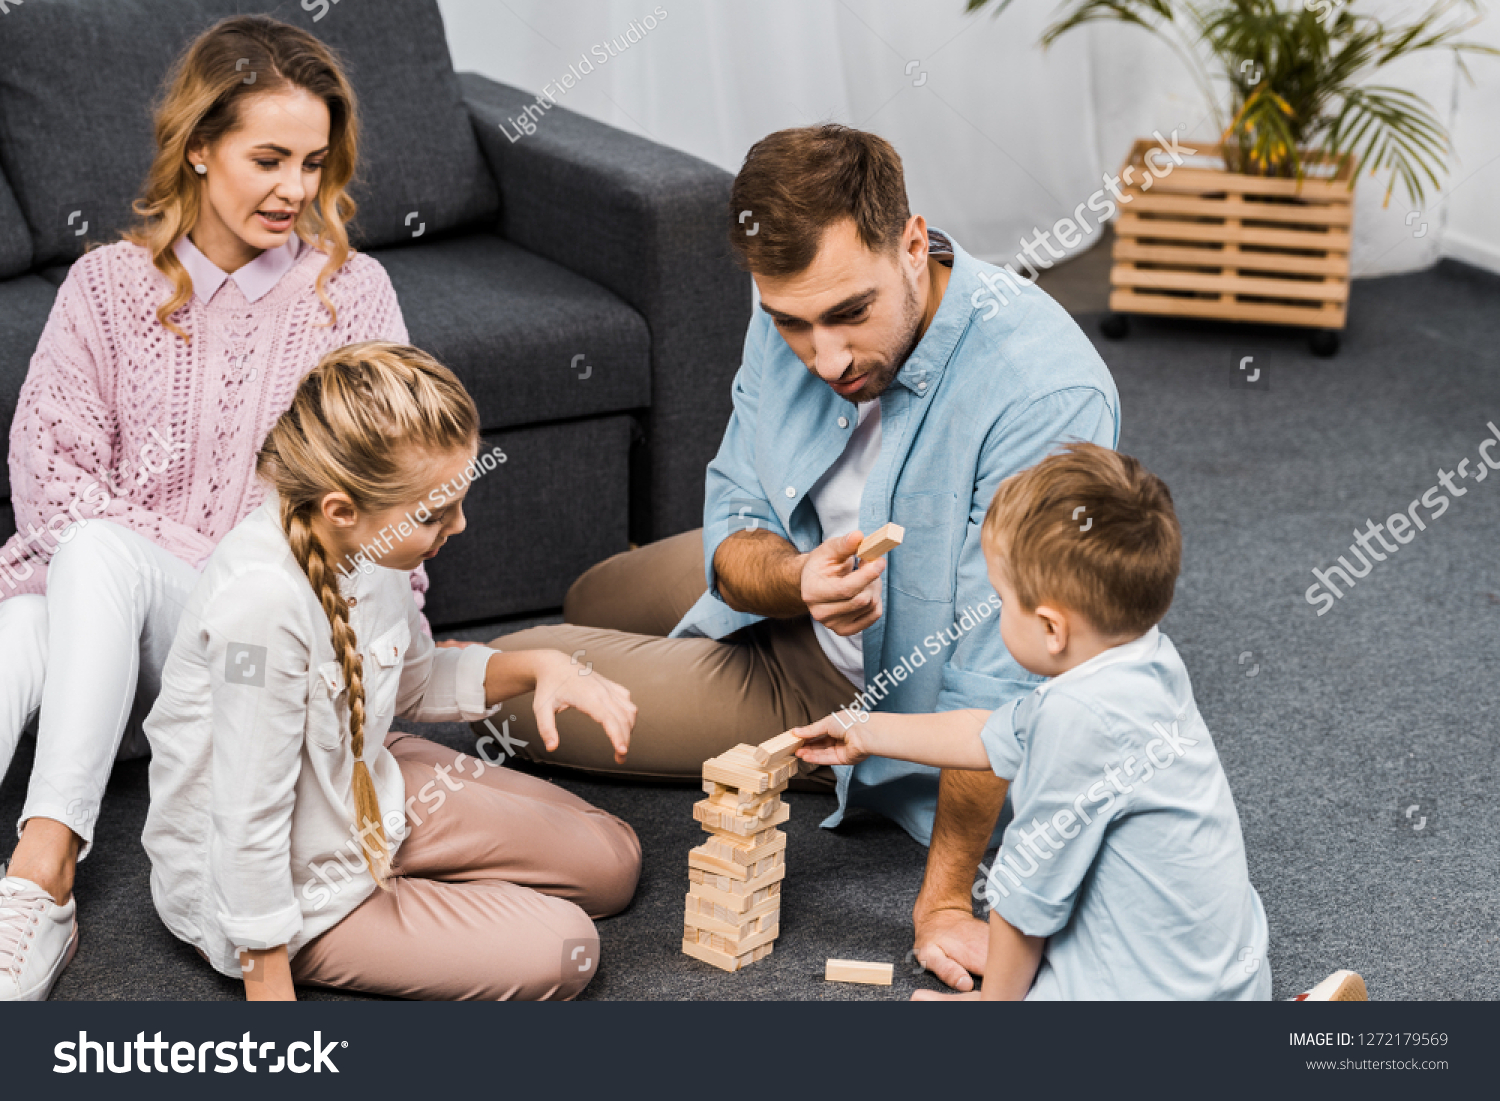 two parents playing blocks wood tower game with children on floor in apartment #1272179569